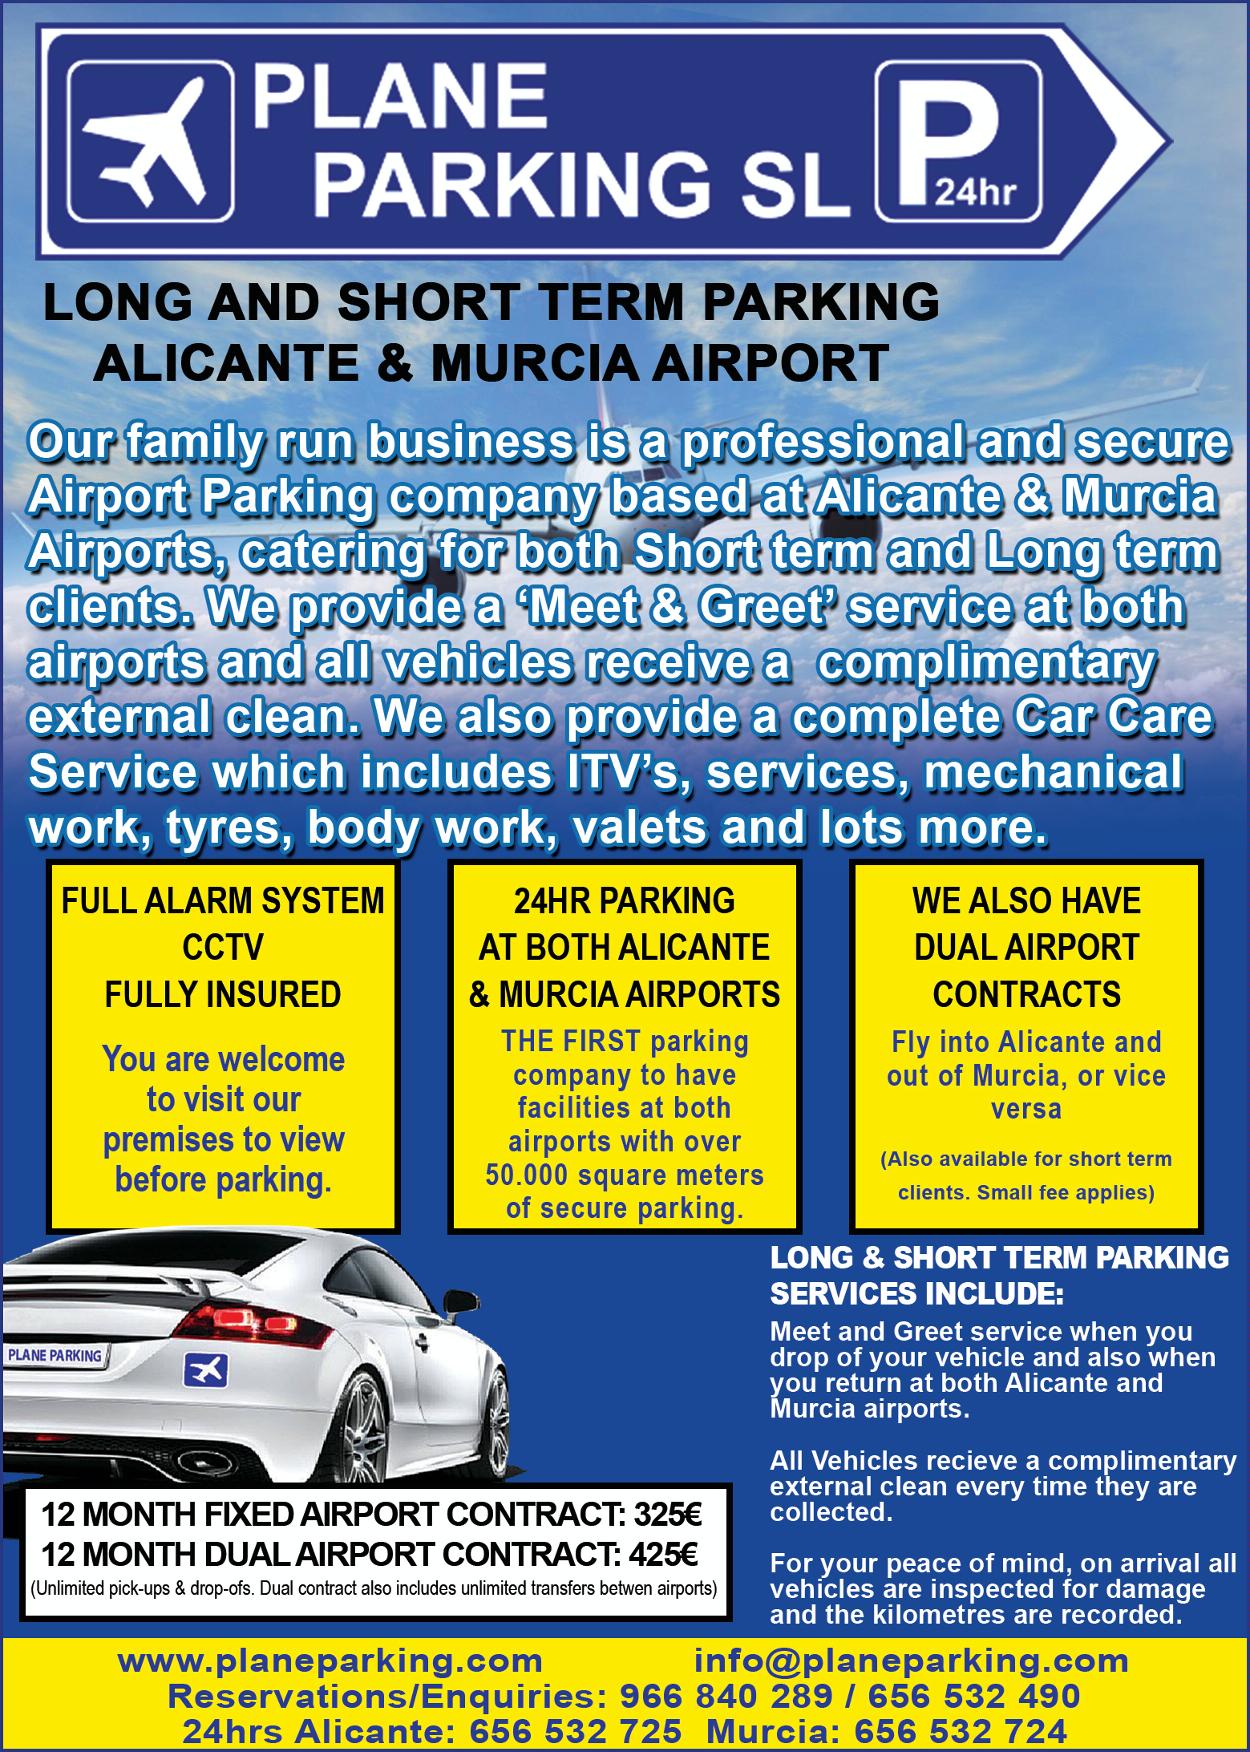 Parking at Murcia (Corvera) Airport and Alicante Airport